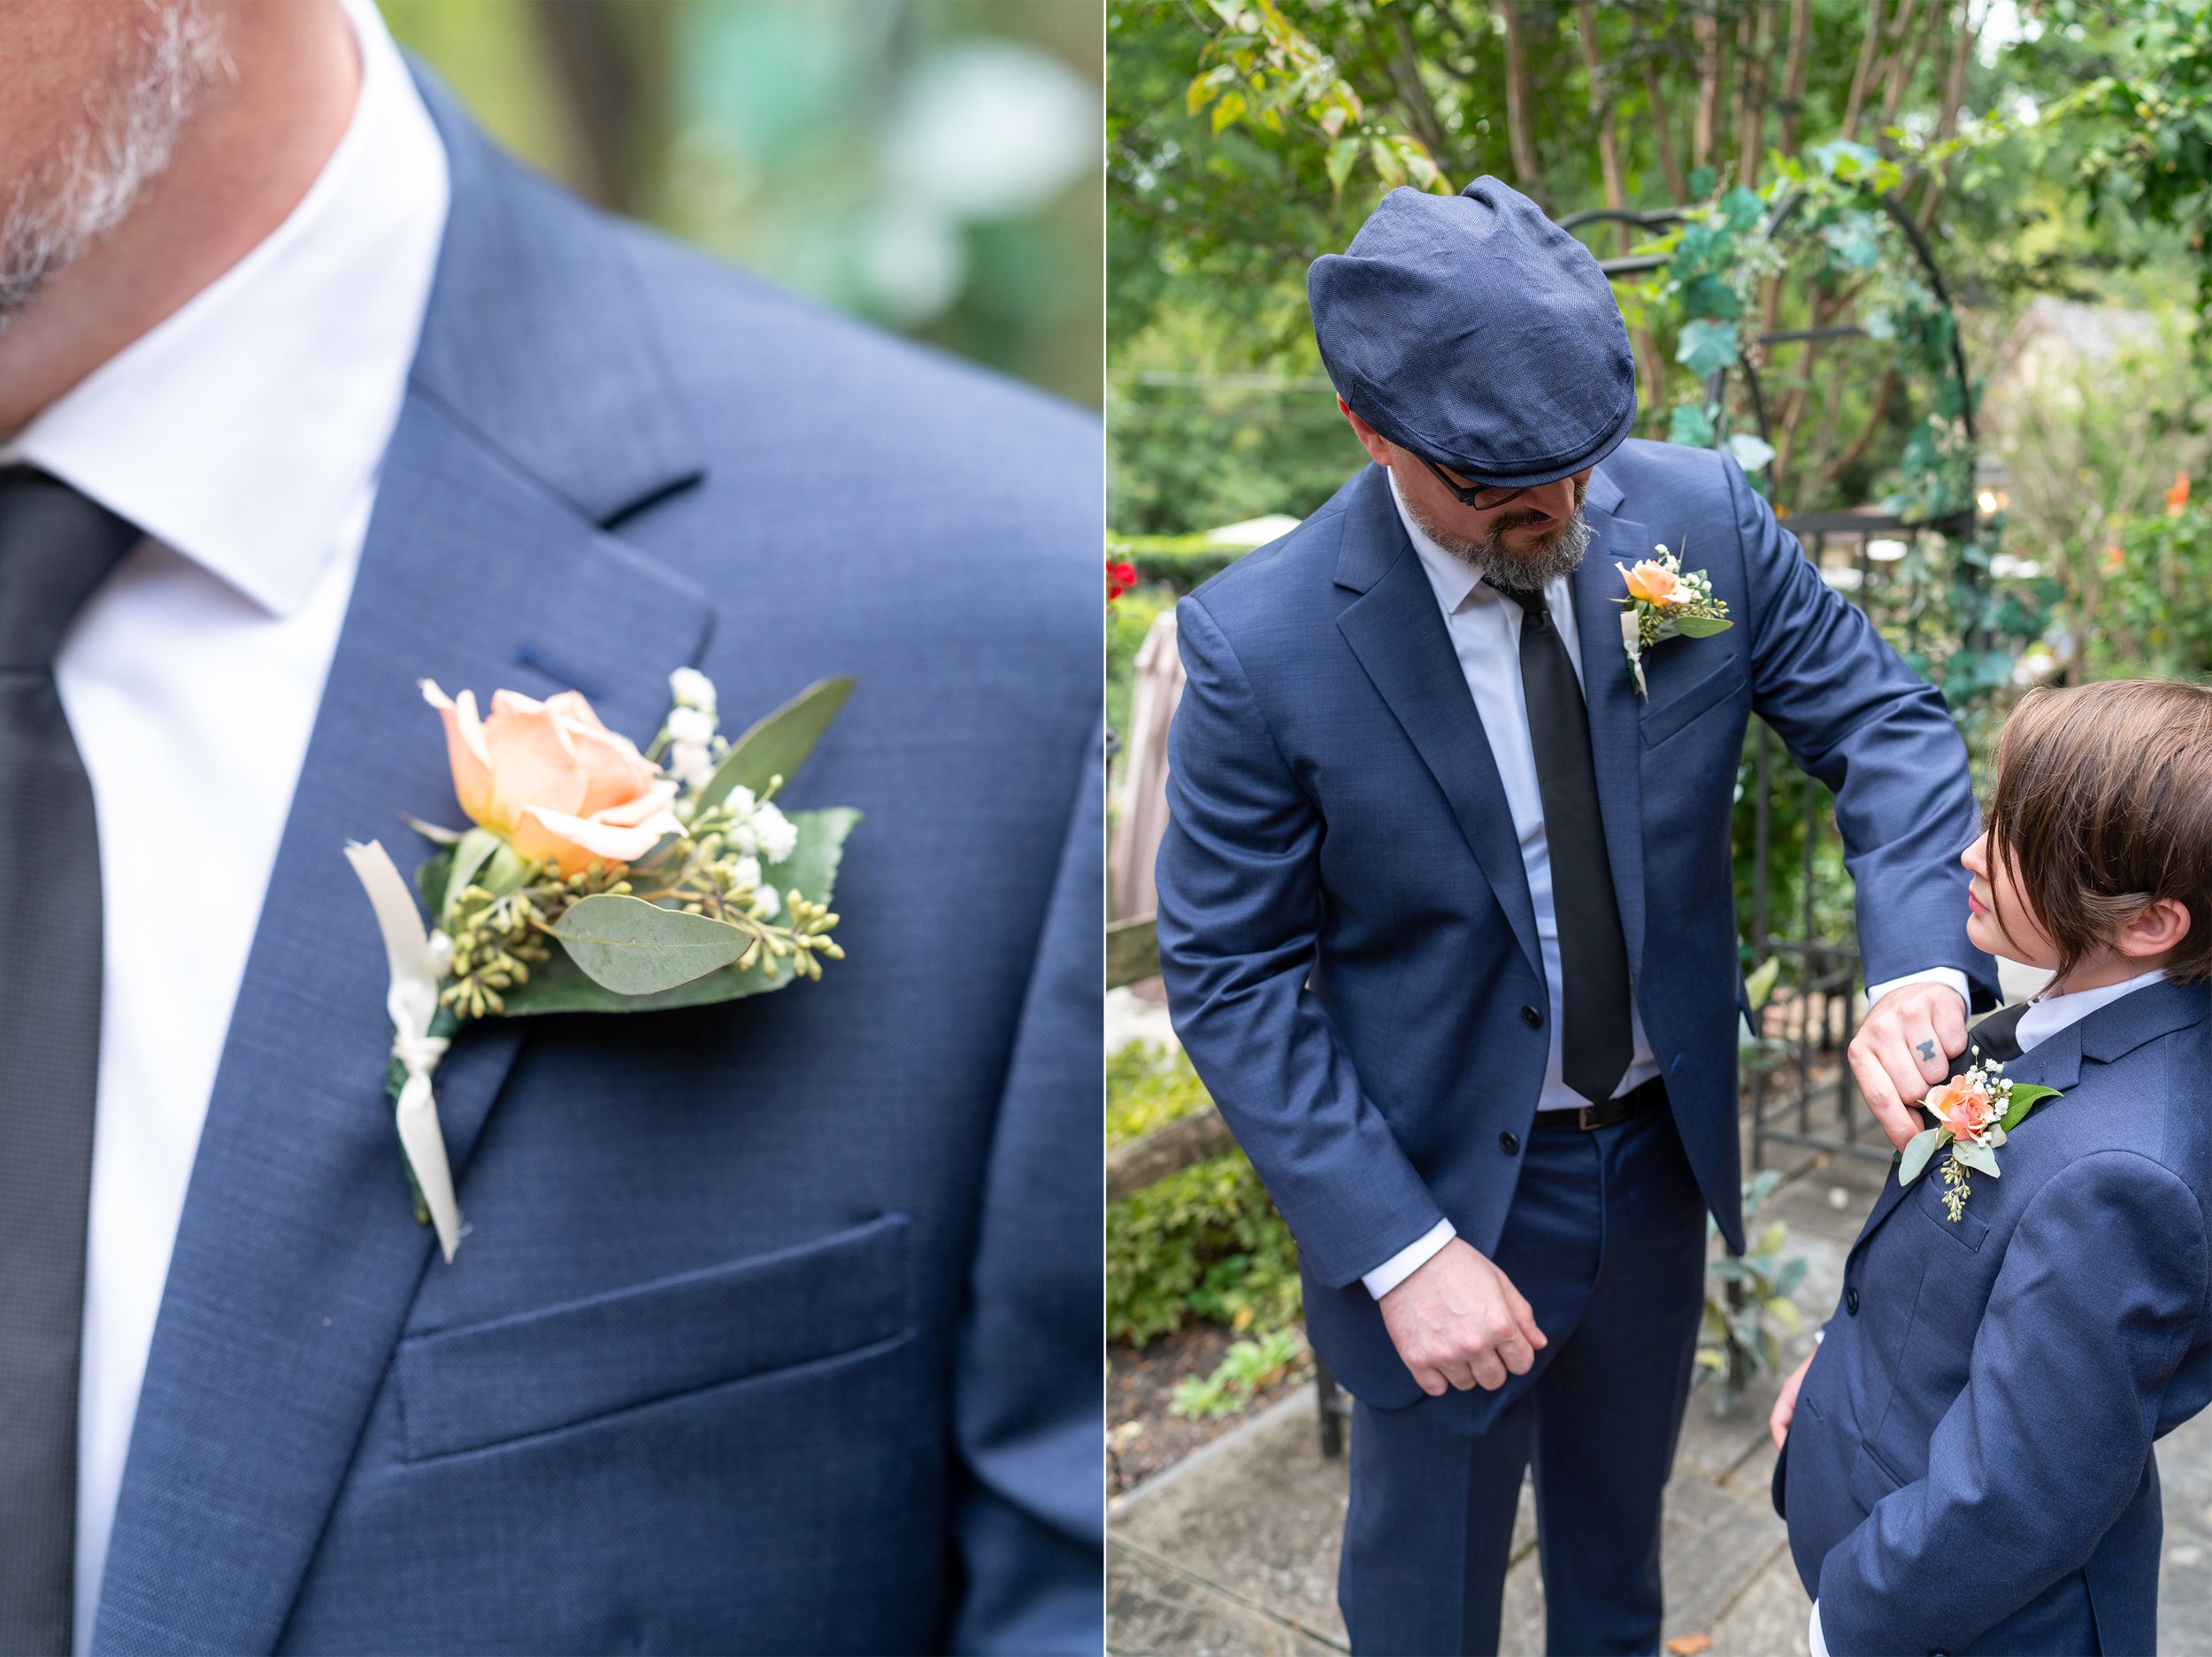 Dad puts a boutonniere on his son's suit